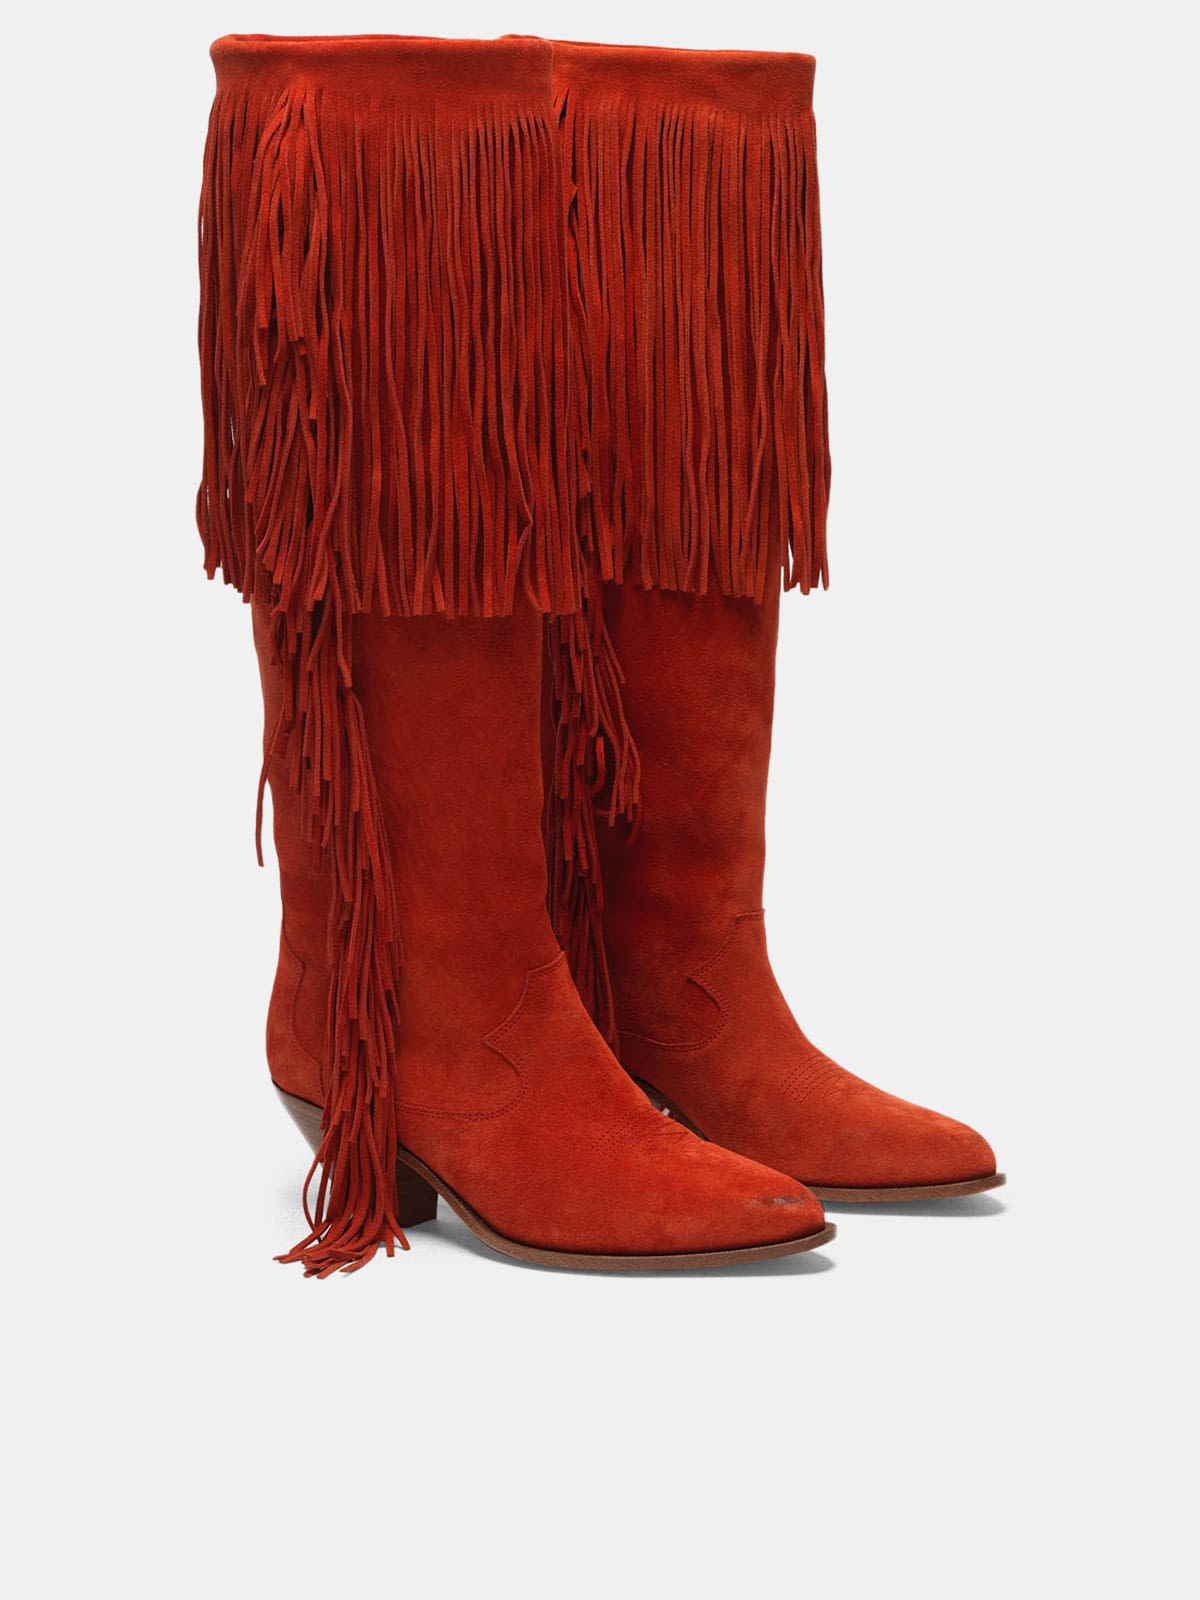 Levriero ankle boots in suede leather with fringes